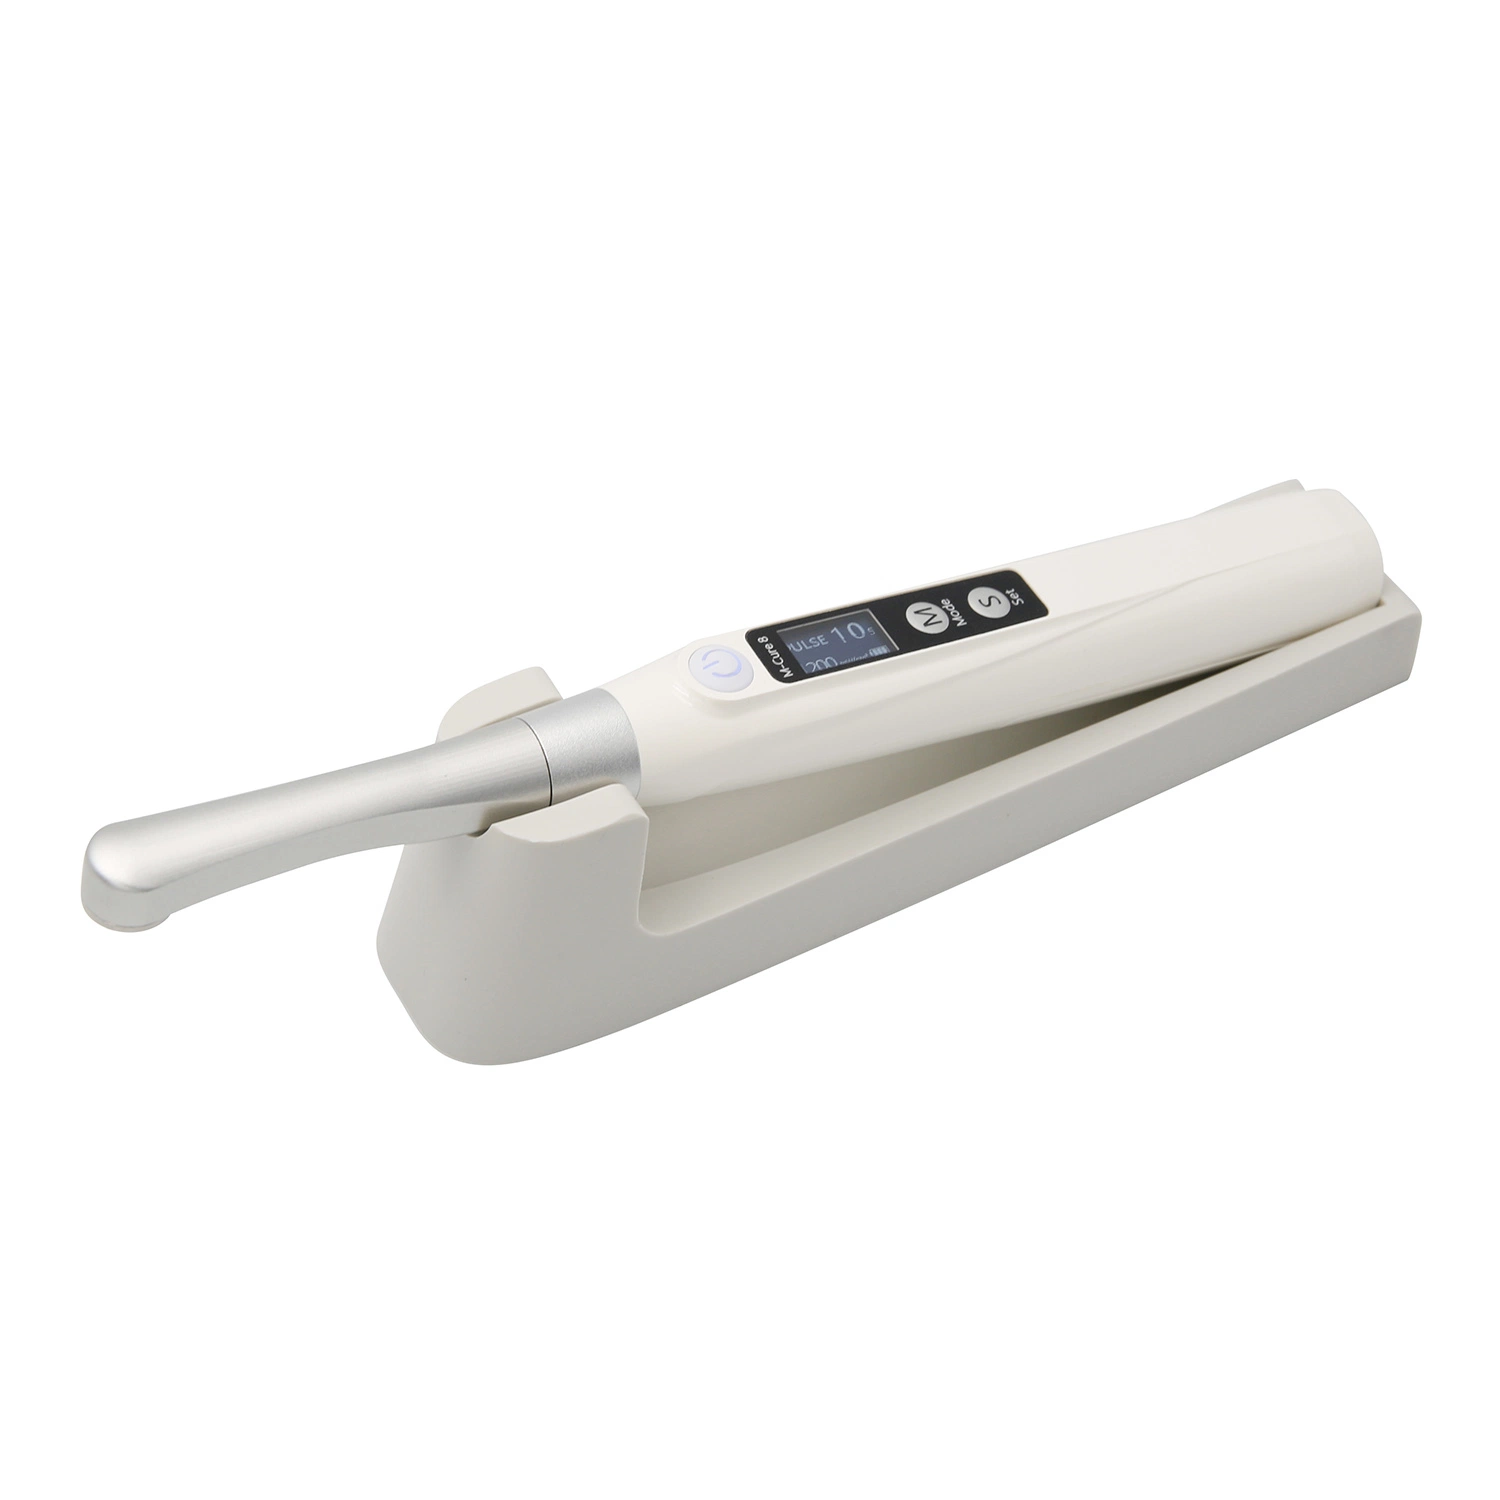 Simple and Easy to Operate Clear Display and 1 Second Fast Cure Dental Equipment Curing Light Handpiece